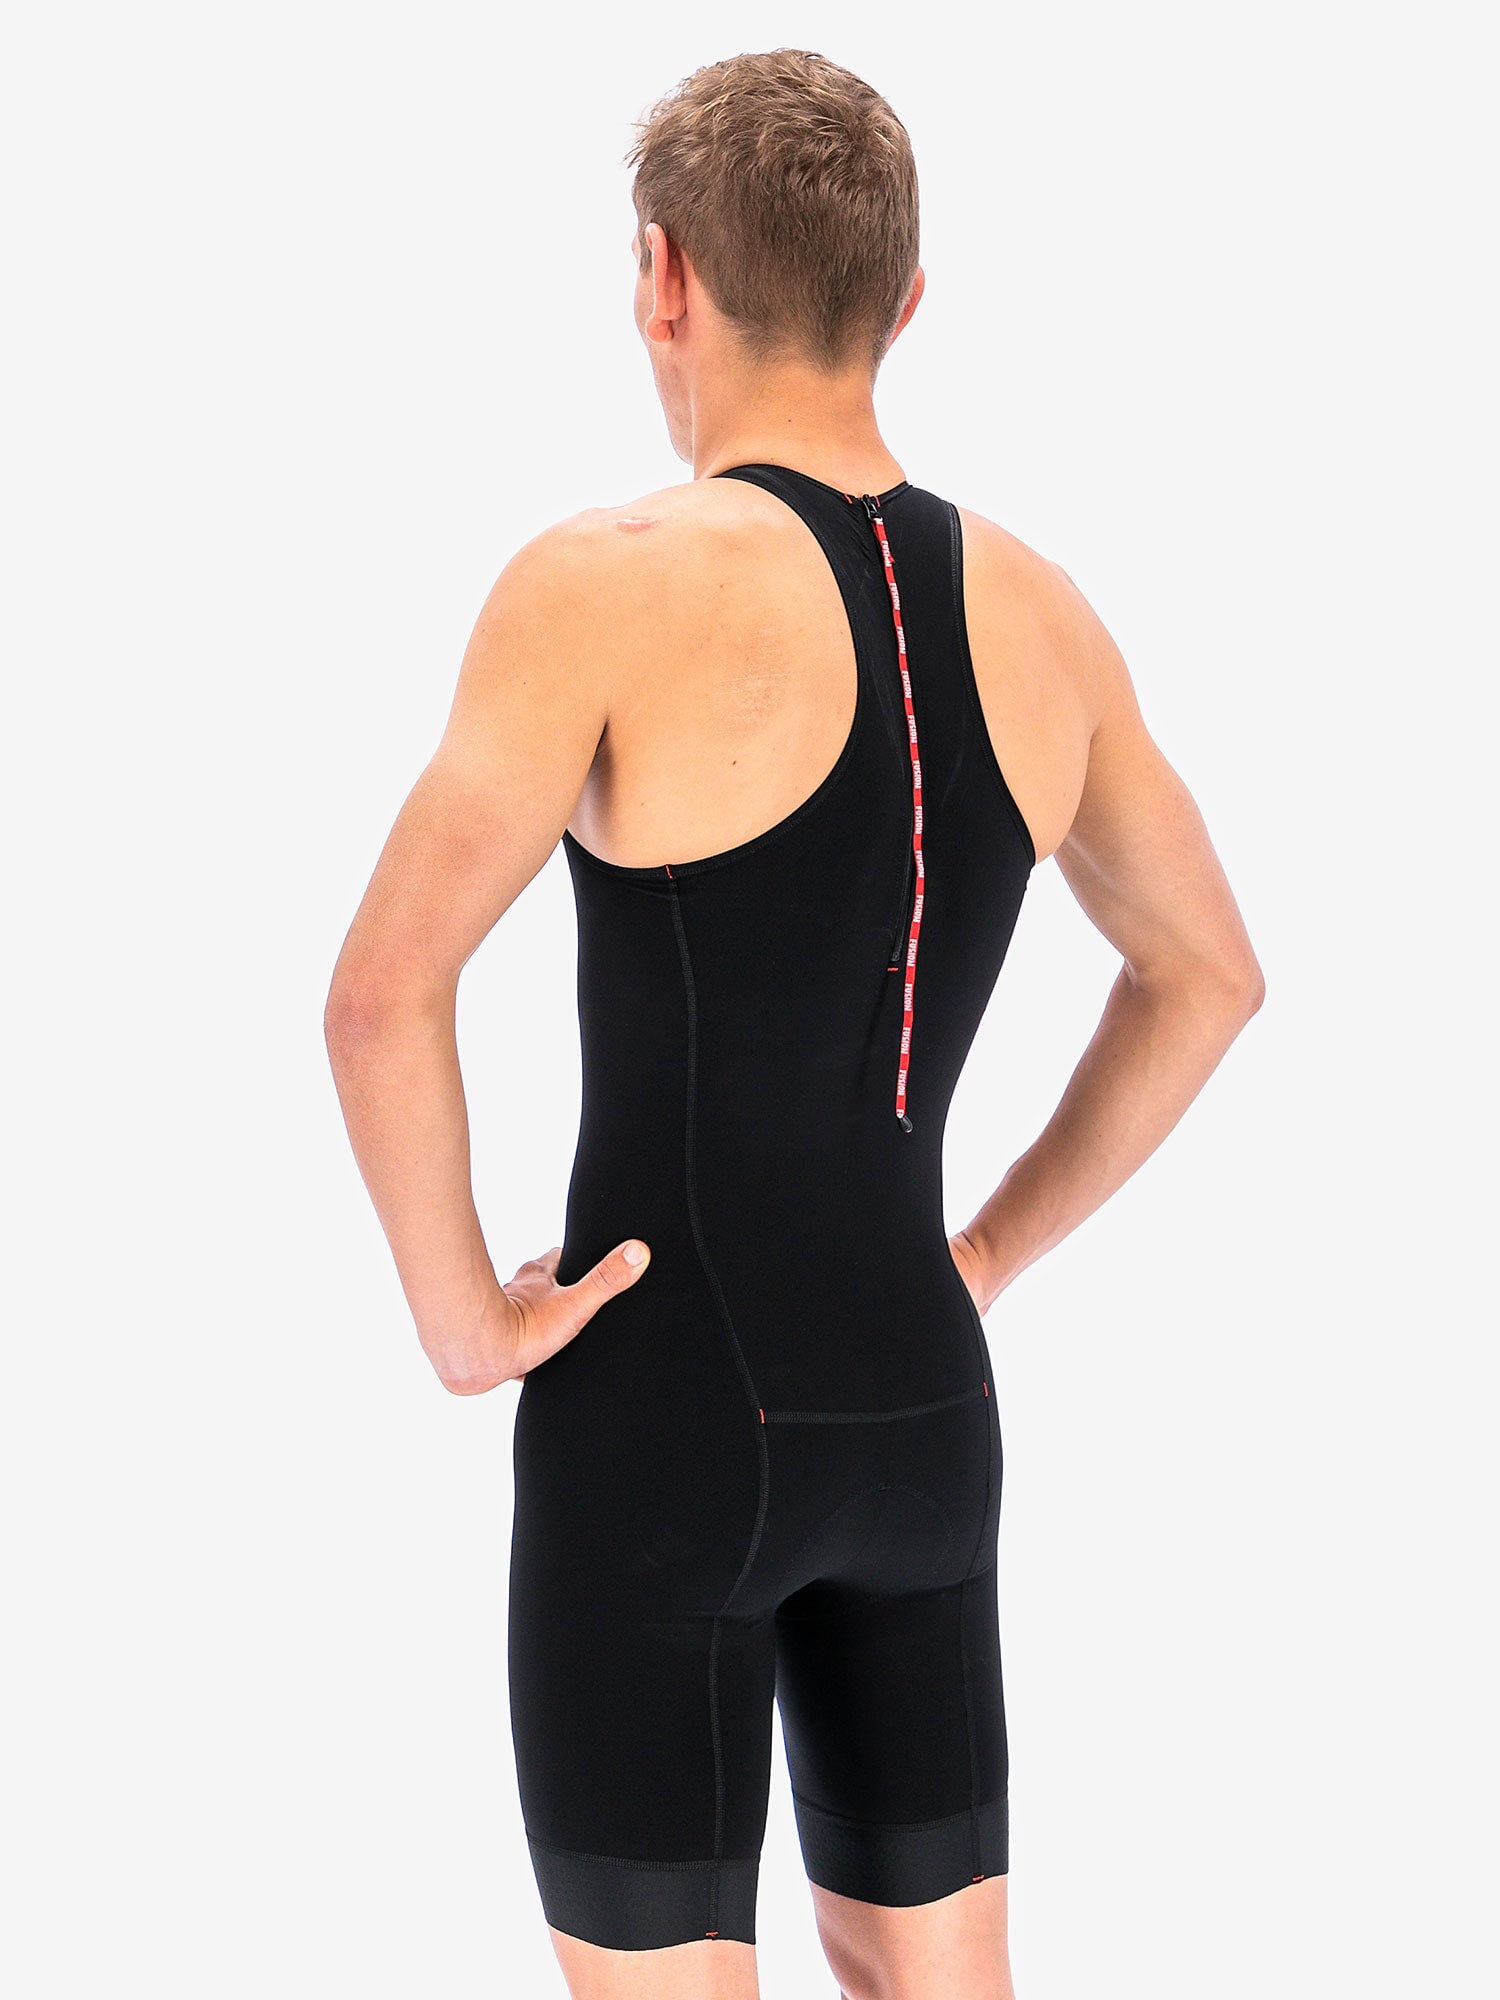 Buy TRI-FIT Men EVO Sleeveless Tri-Suit online from GRIT+TONIC in UAE